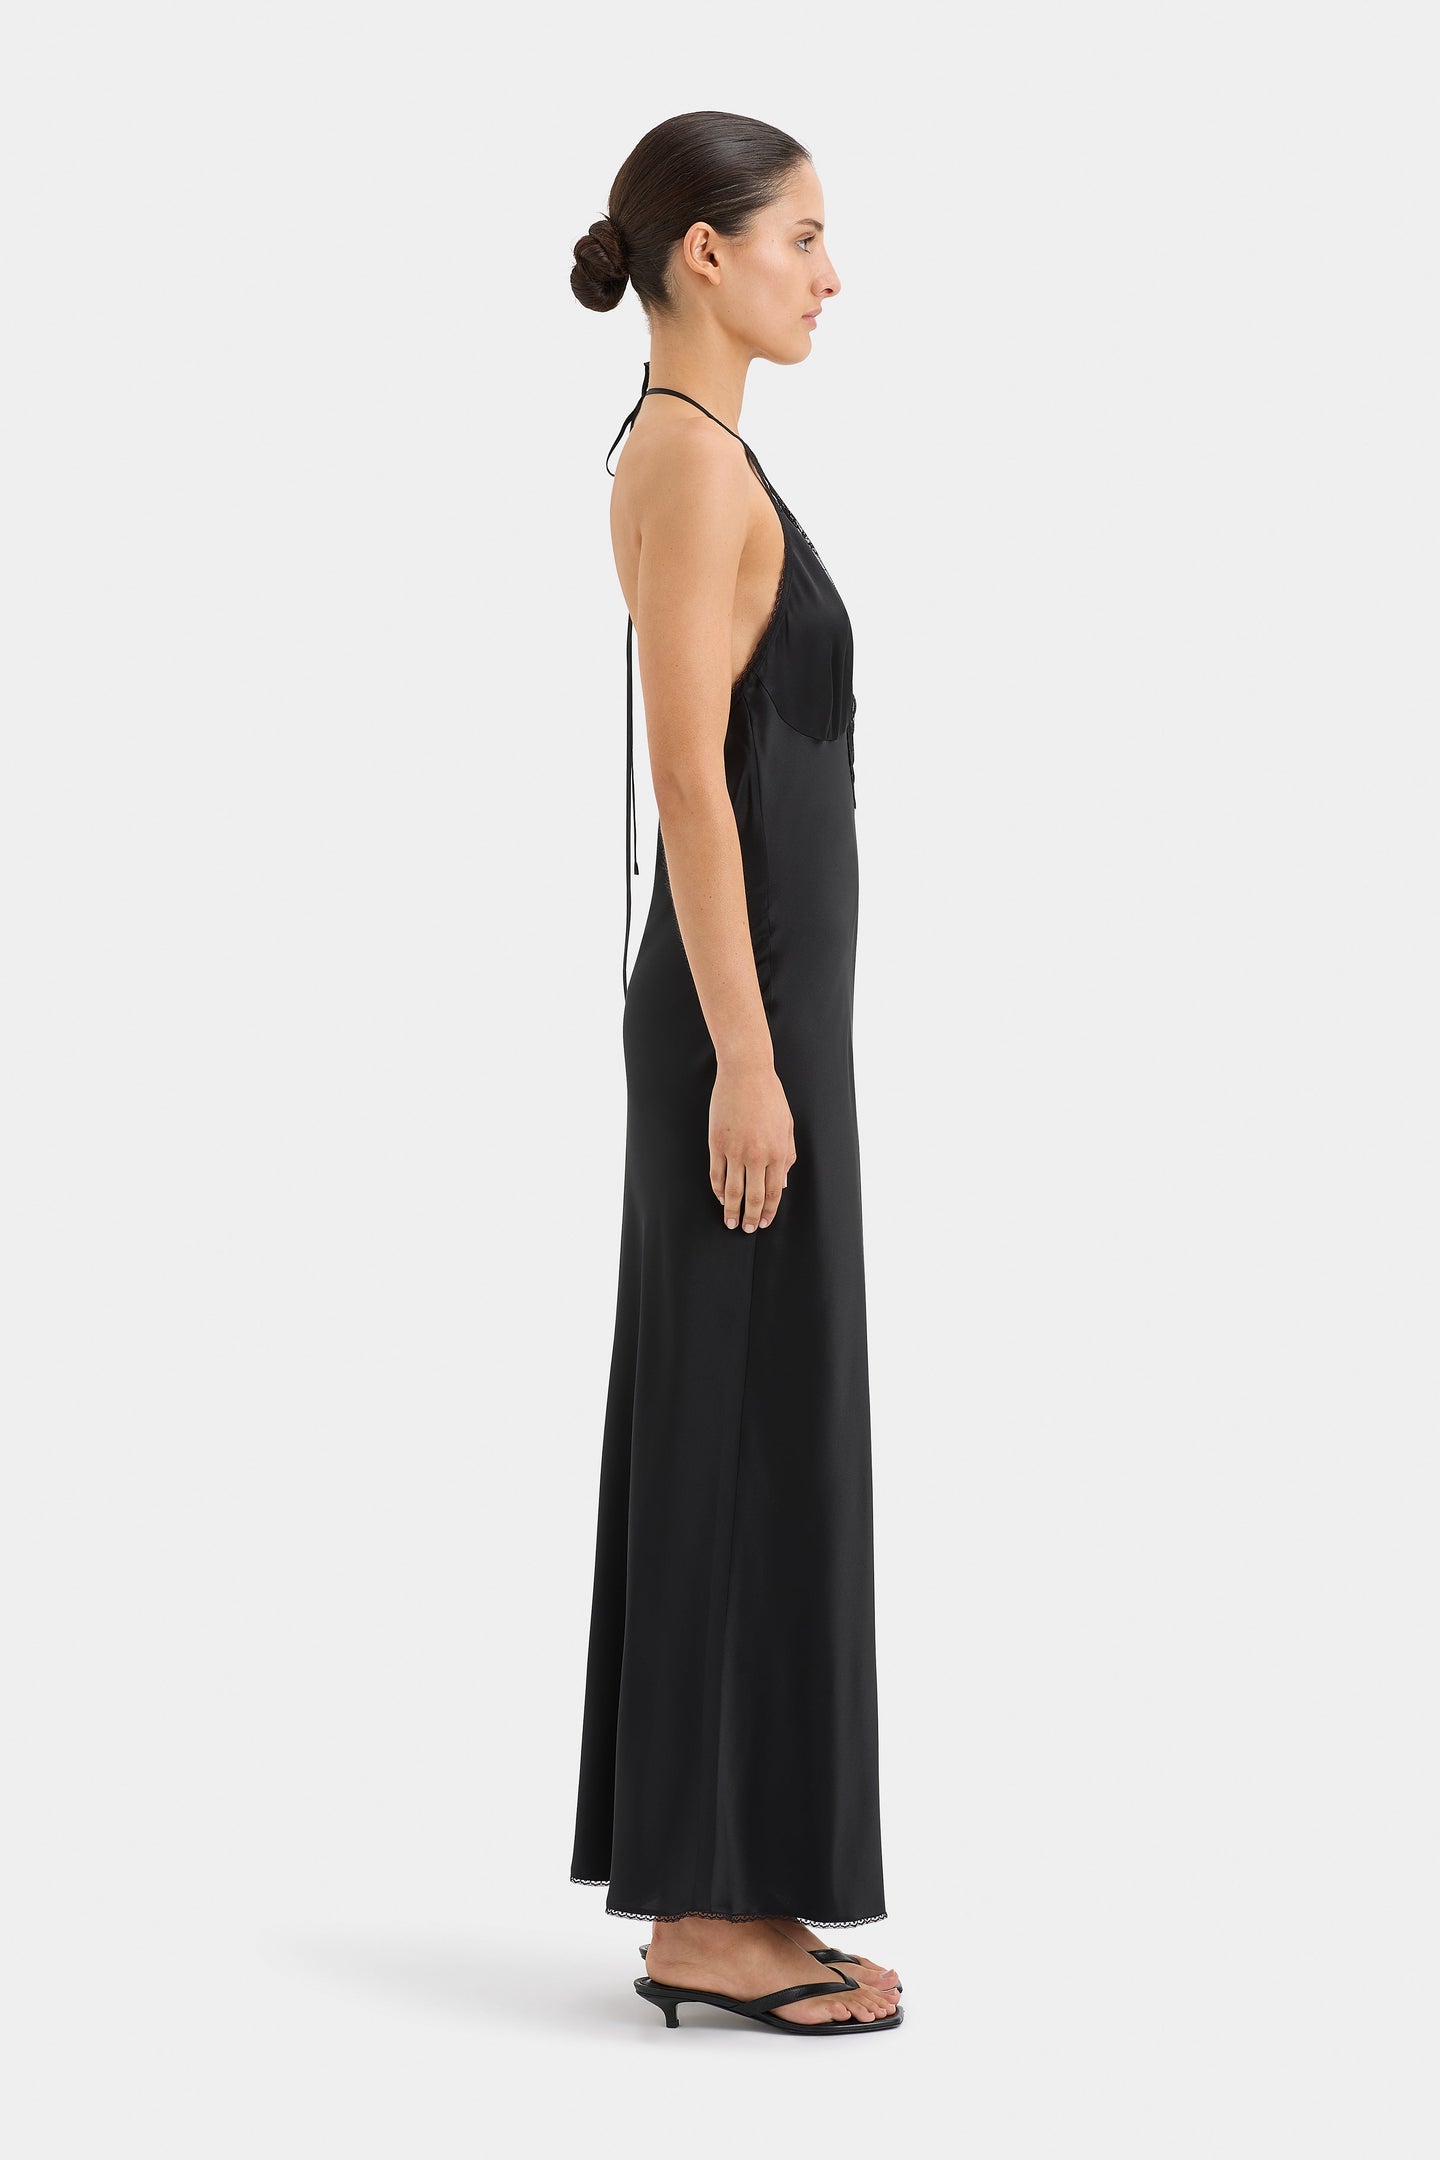 SIR the label Aries Halter Gown BLACK